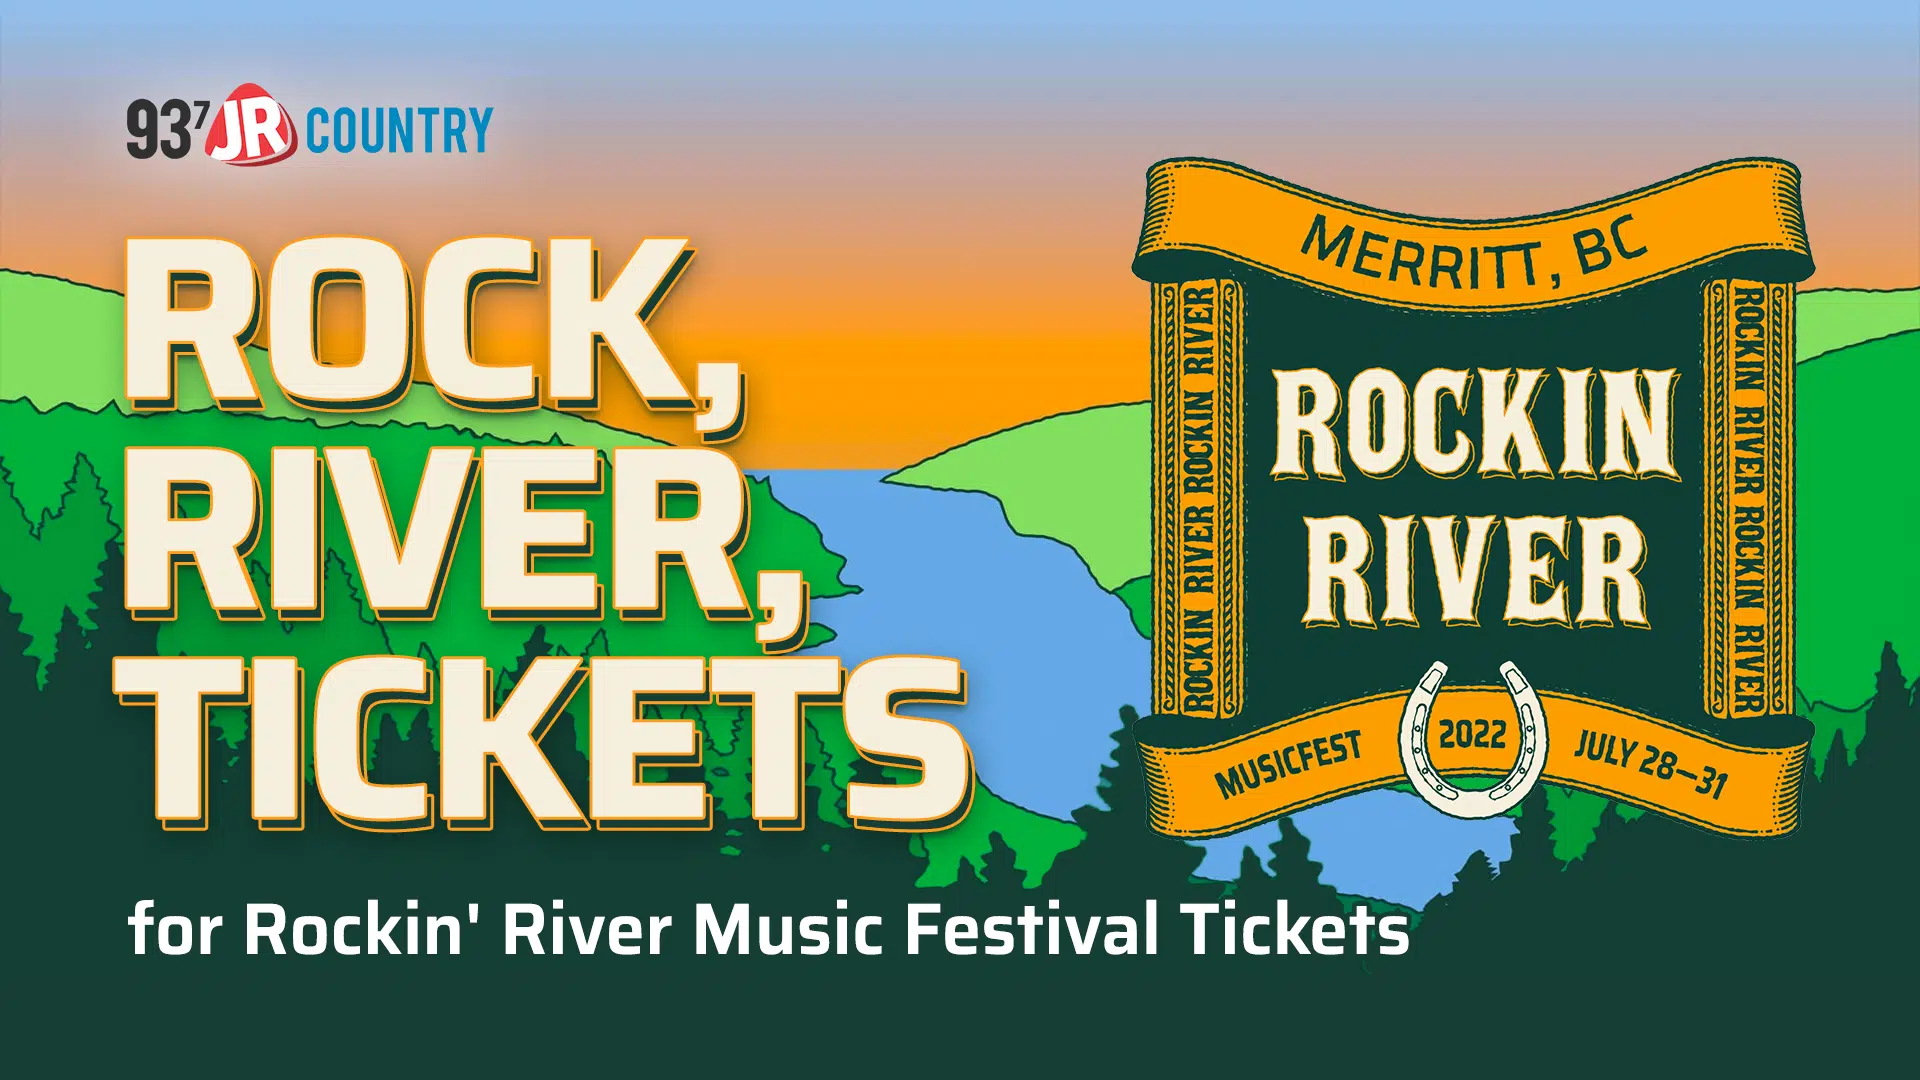 Rock, River, Tickets for Rockin’ River 93.7 JR Country